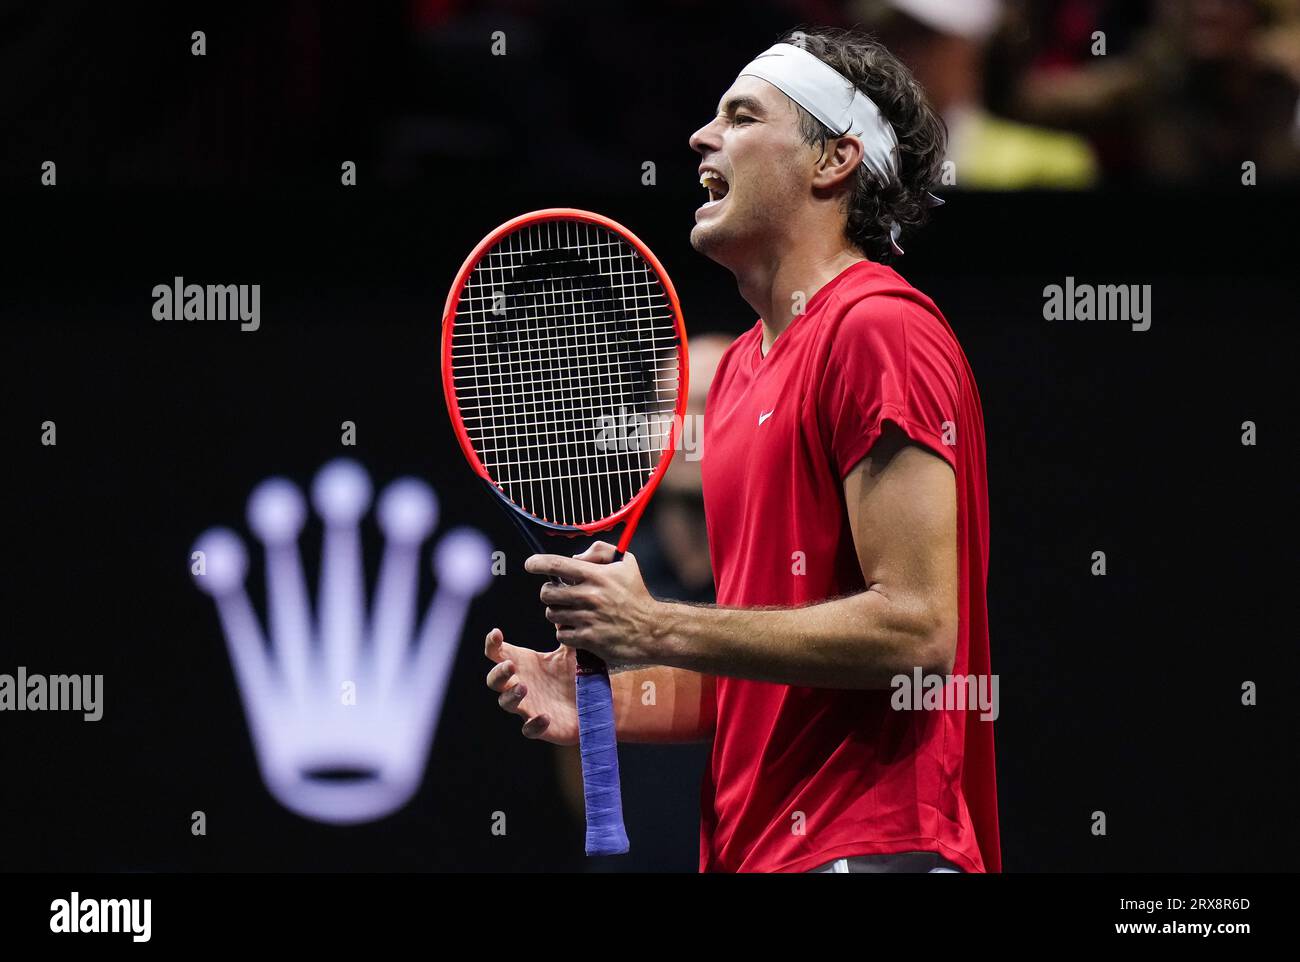 Team Worlds Taylor Fritz reacts after playing a point against Team Europes Andrey Rublev during a Laver Cup tennis match Saturday, Sept